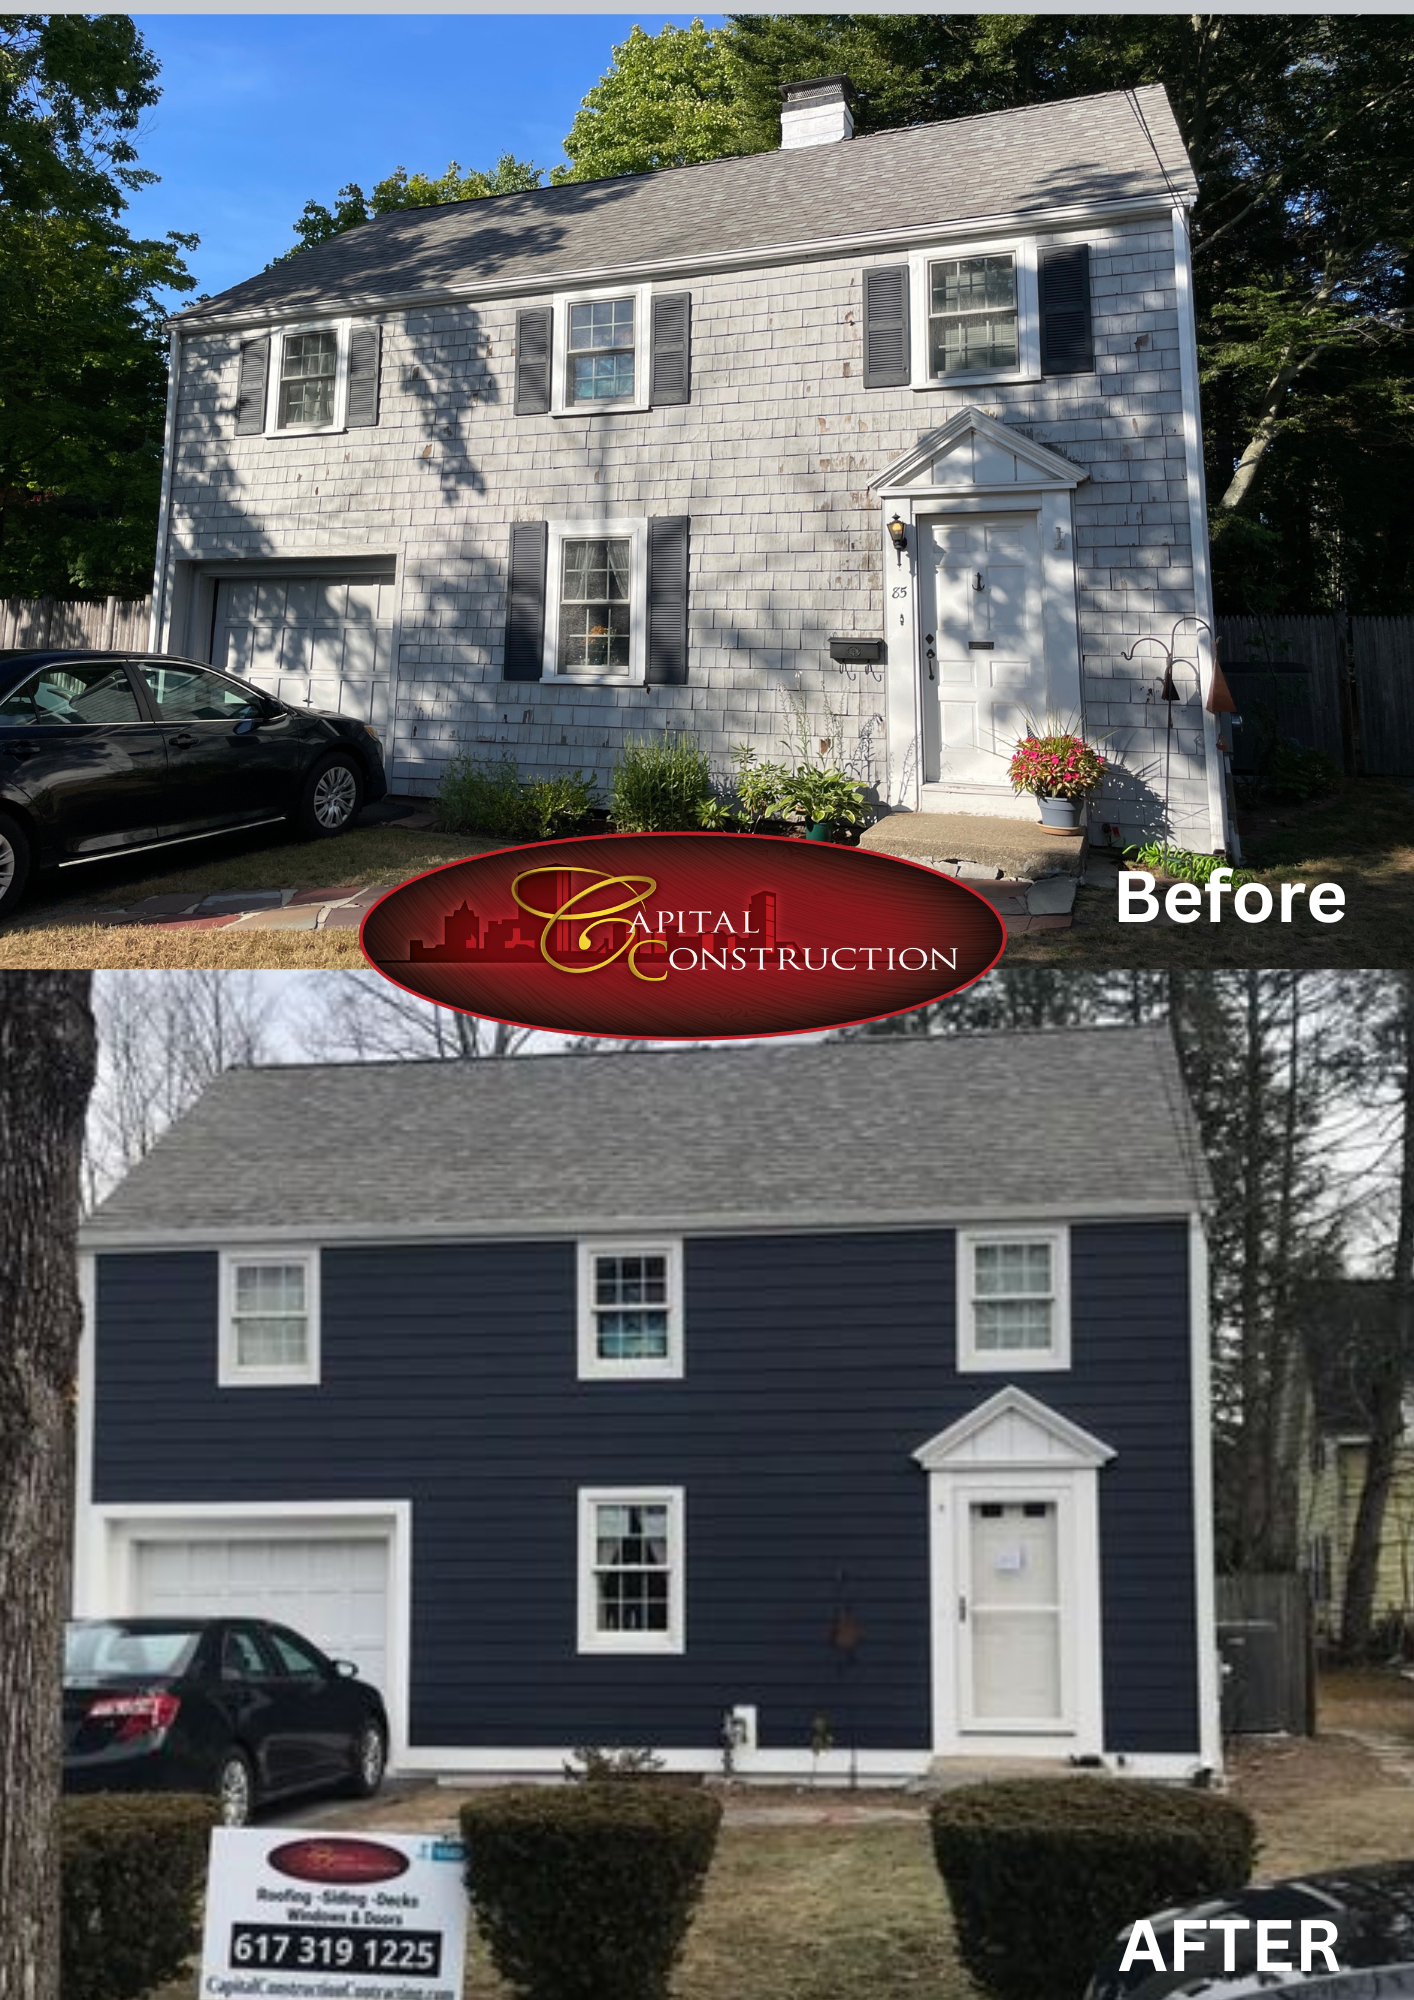 Before and after photos of a James Hardie siding installation completed in Wellesley, MA